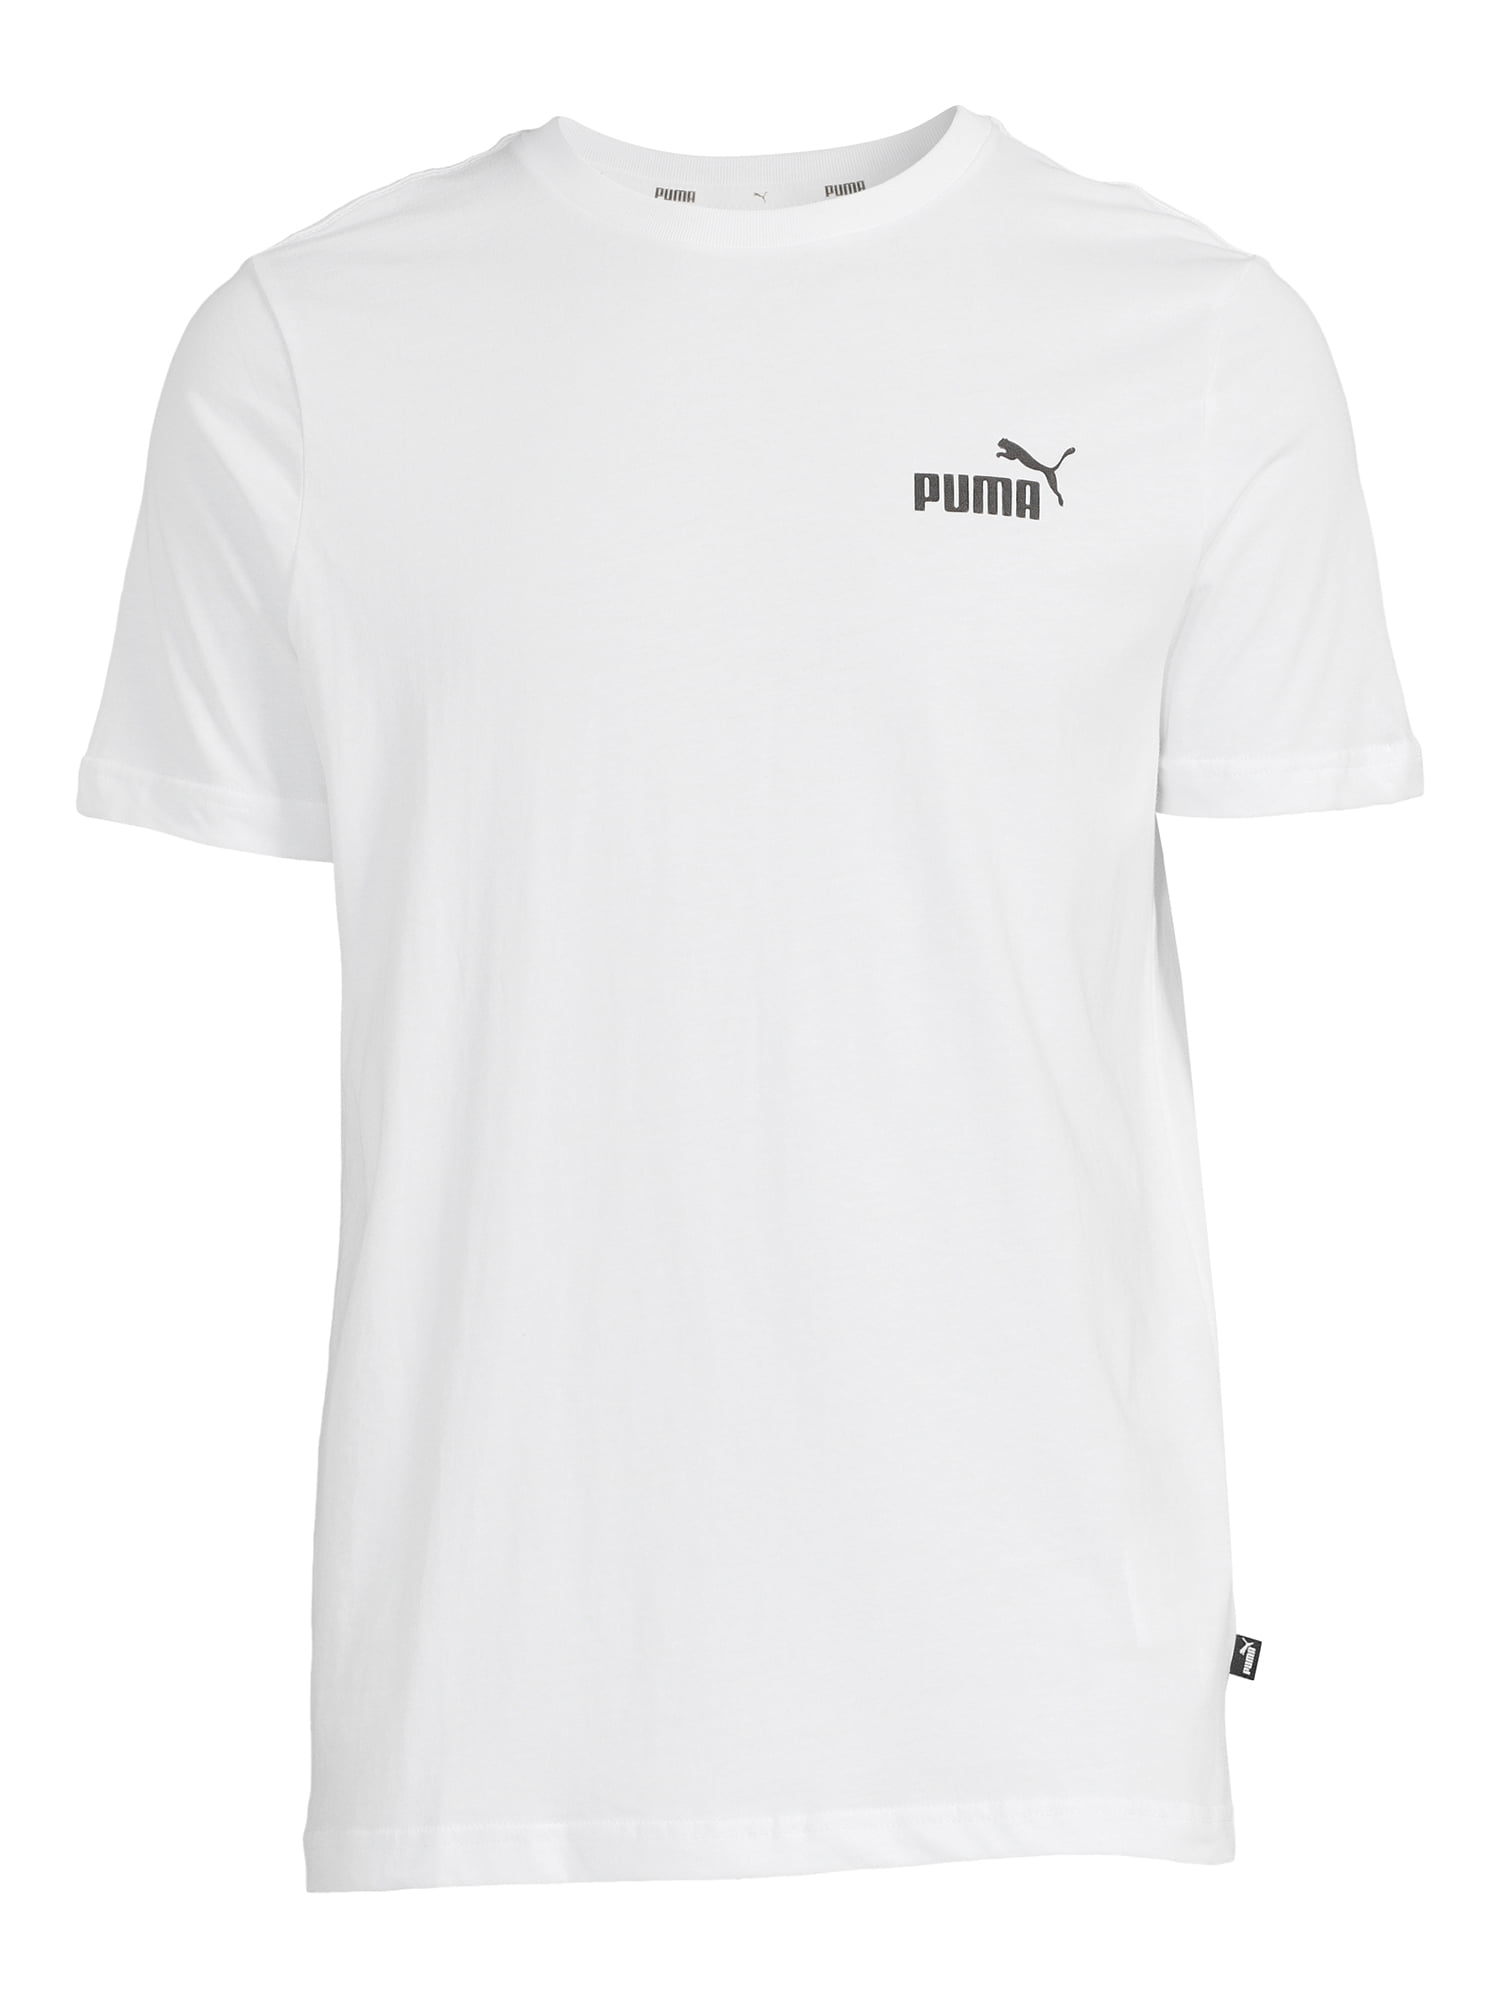 PUMA Men\'s and Big Men\'s Essential Chest Logo Tee Shirt, sizes S to 2XL